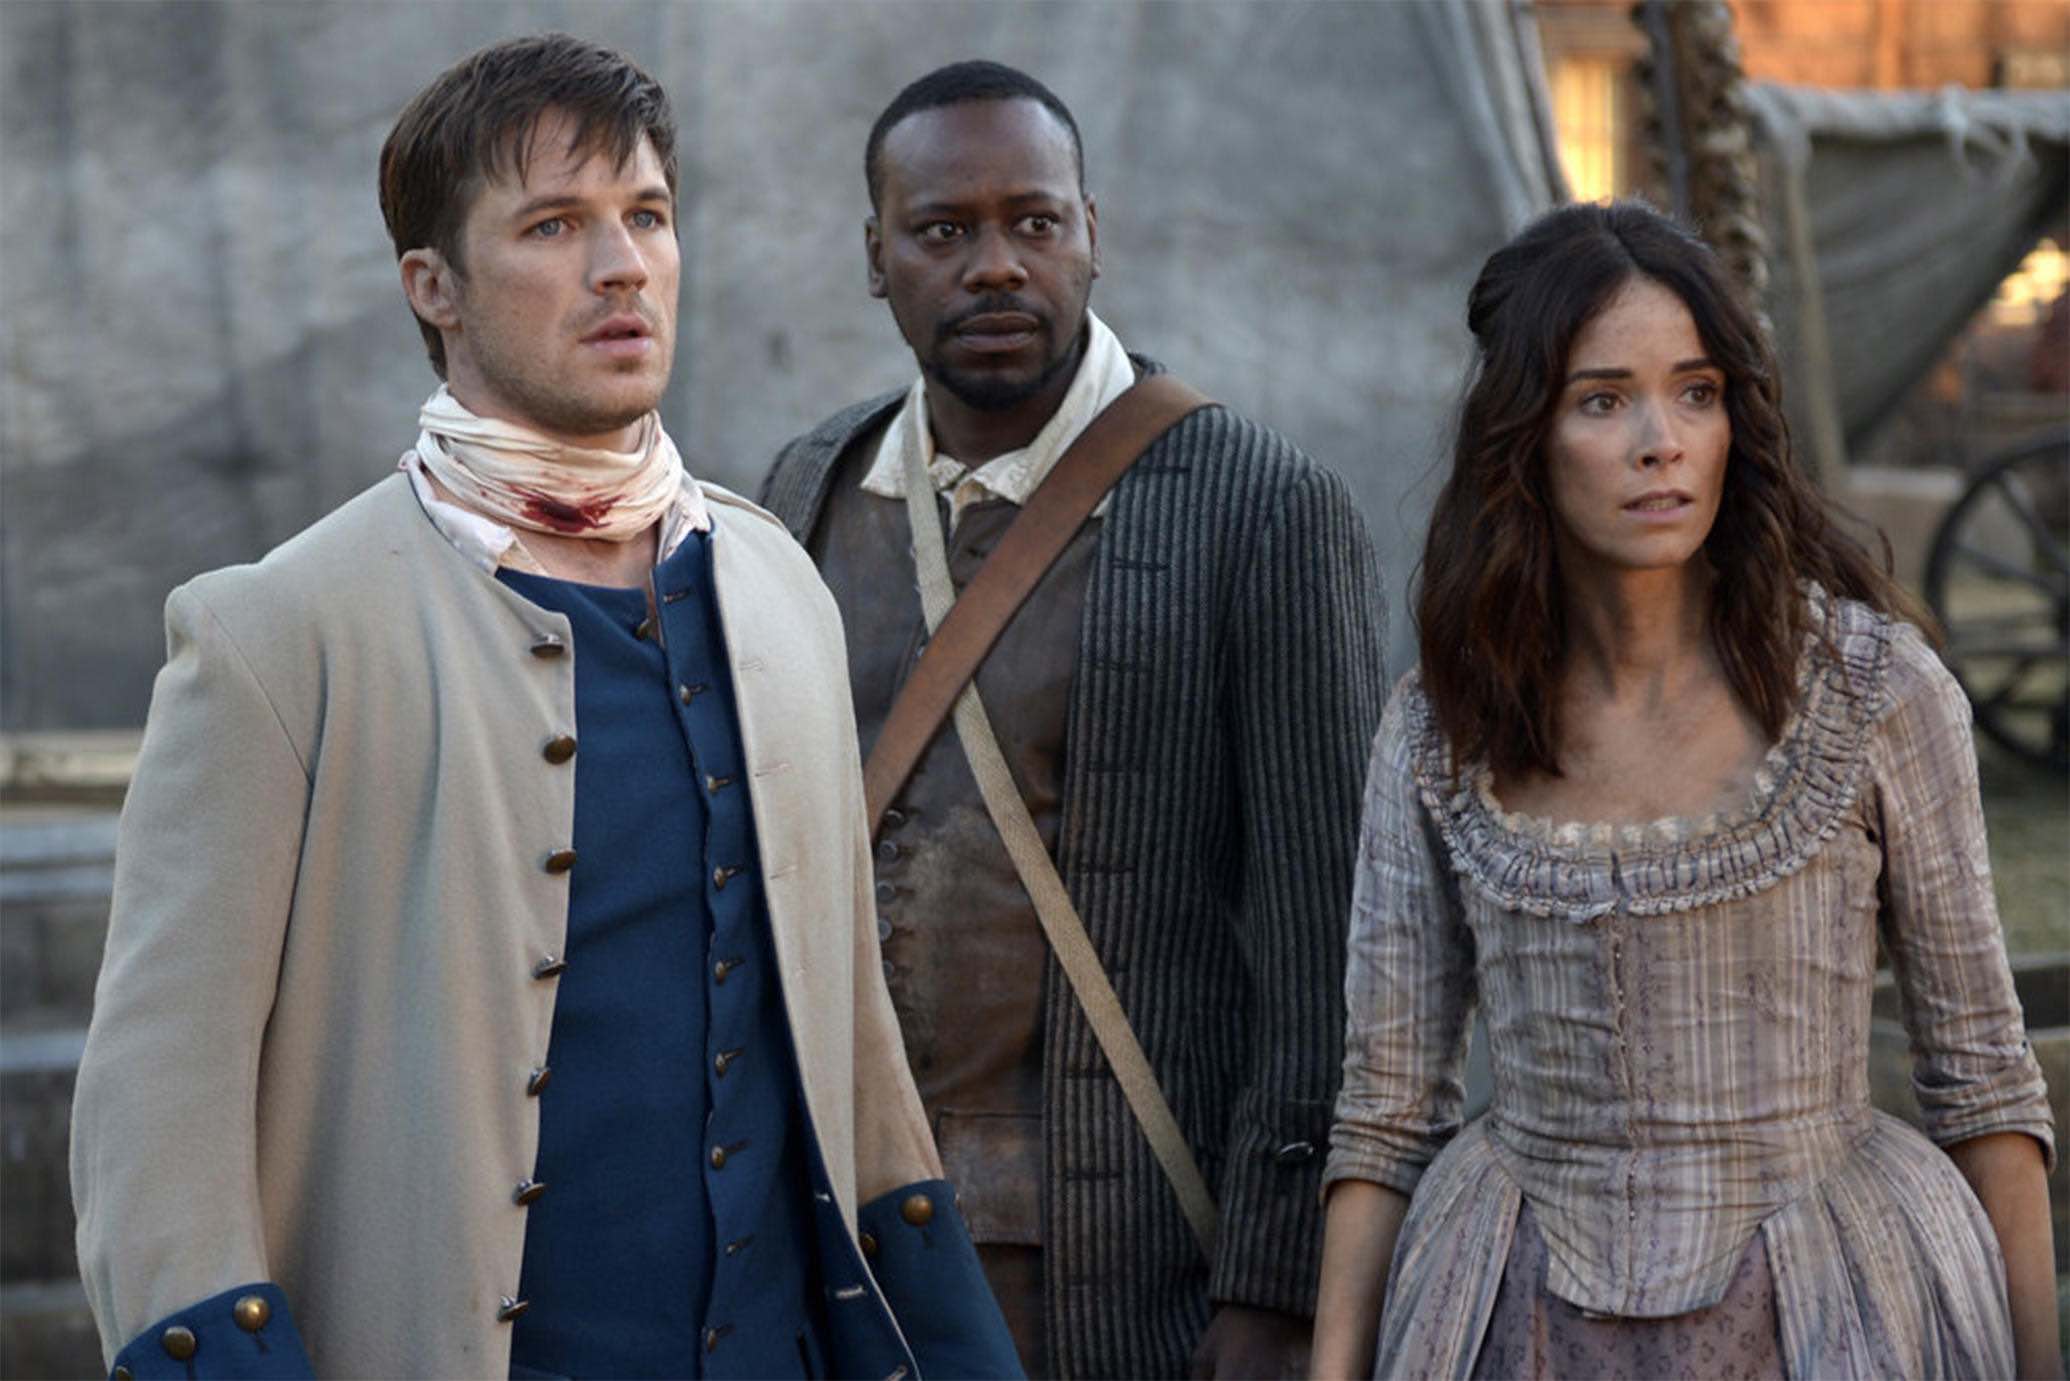 'Timeless' lives on in the hearts of viewers. Here's why the cancelled show was so compelling.